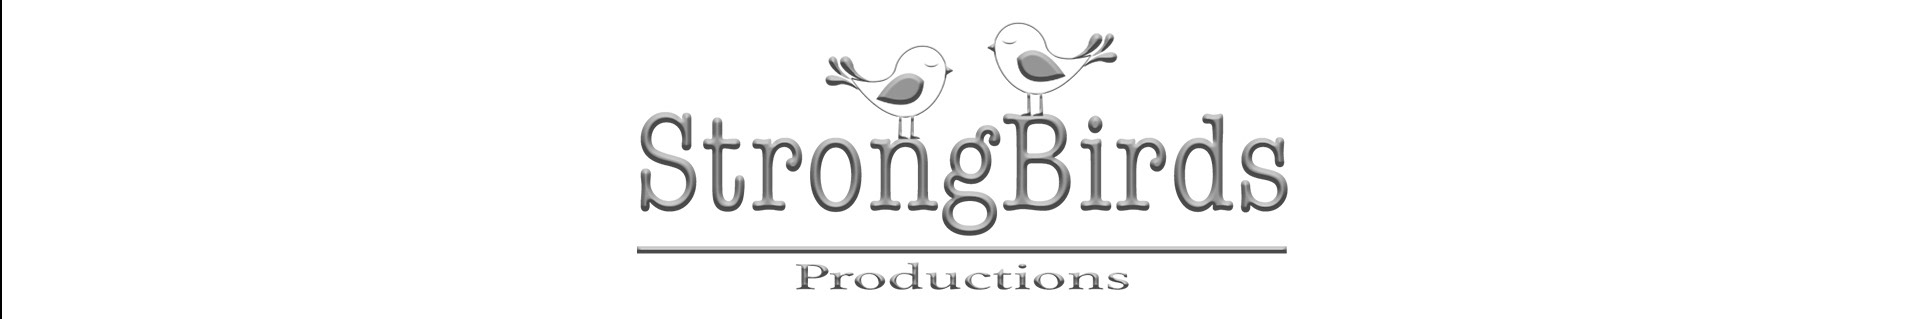 Strong Birds Productionss profilbanner